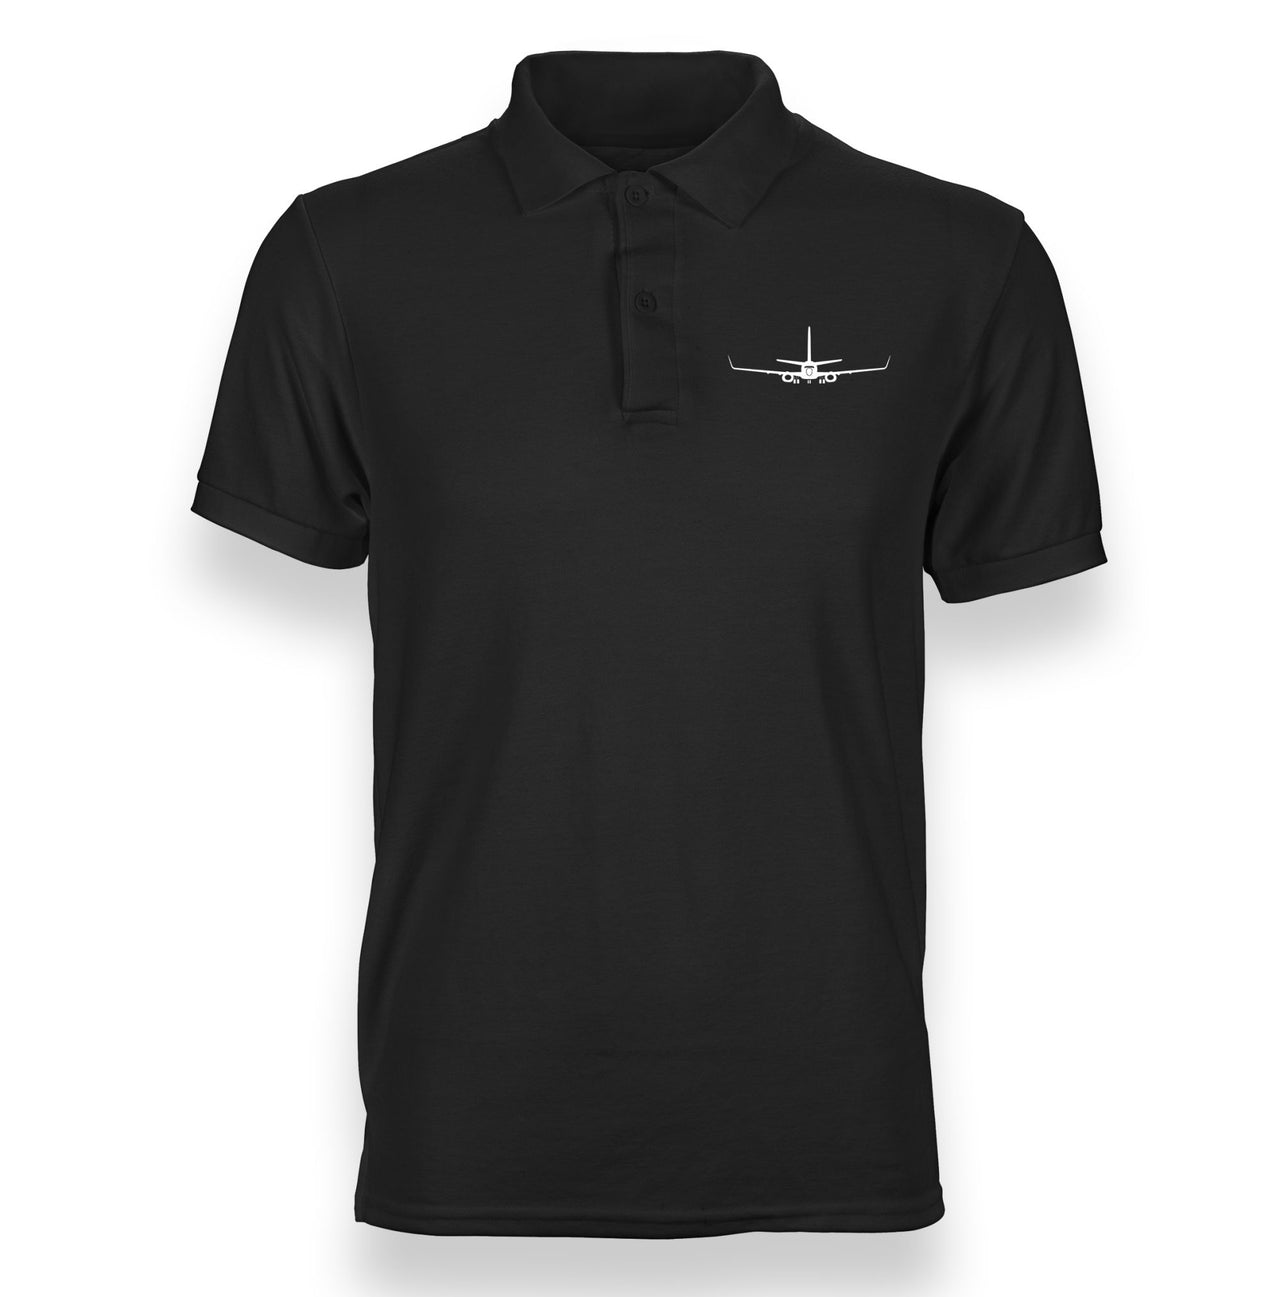 Boeing 737-800NG Silhouette Designed "WOMEN" Polo T-Shirts